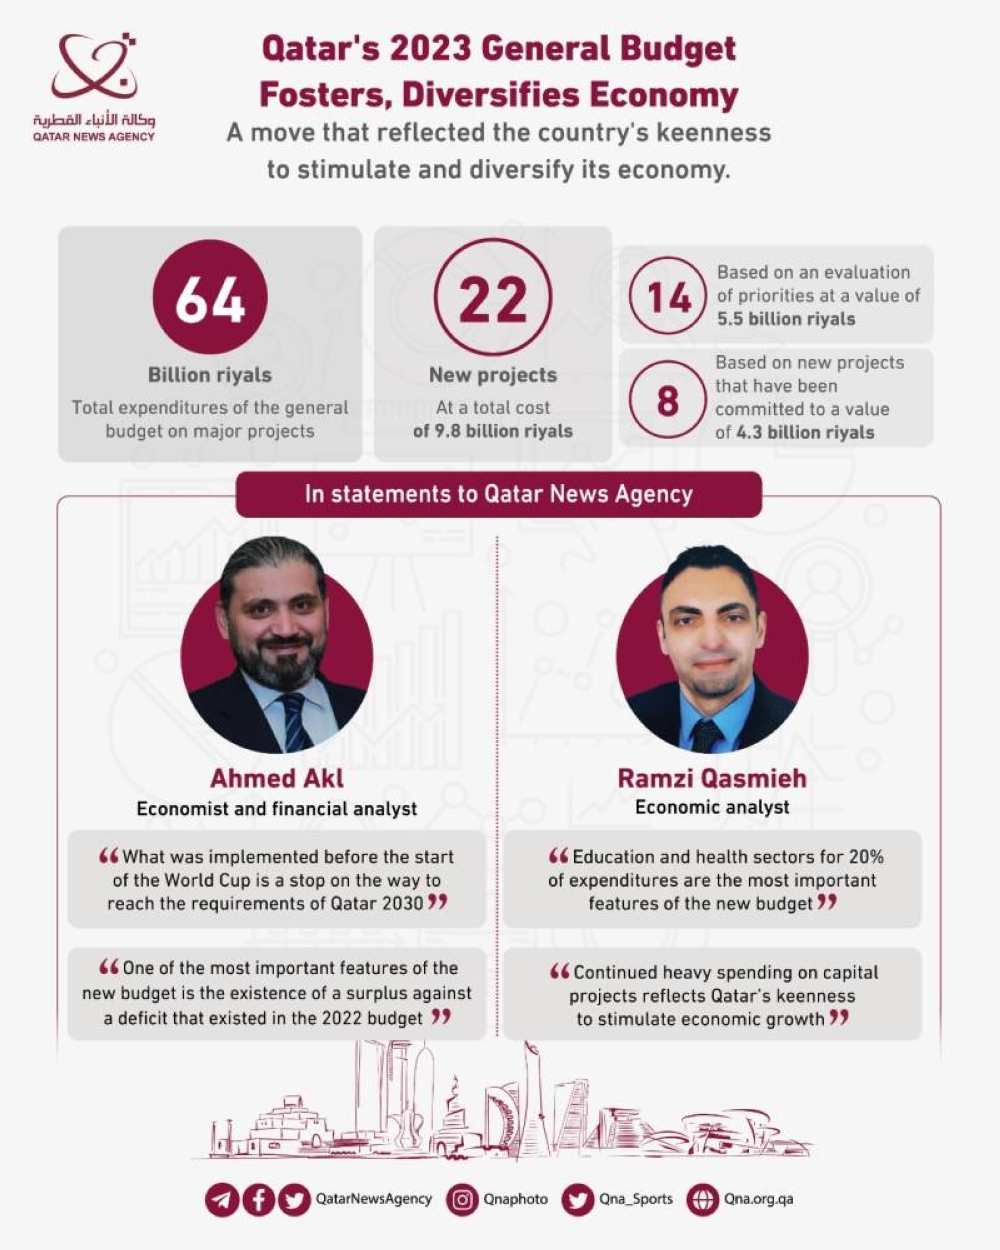 Qatar’s 2023 budget reflects will to further stimulate, diversify